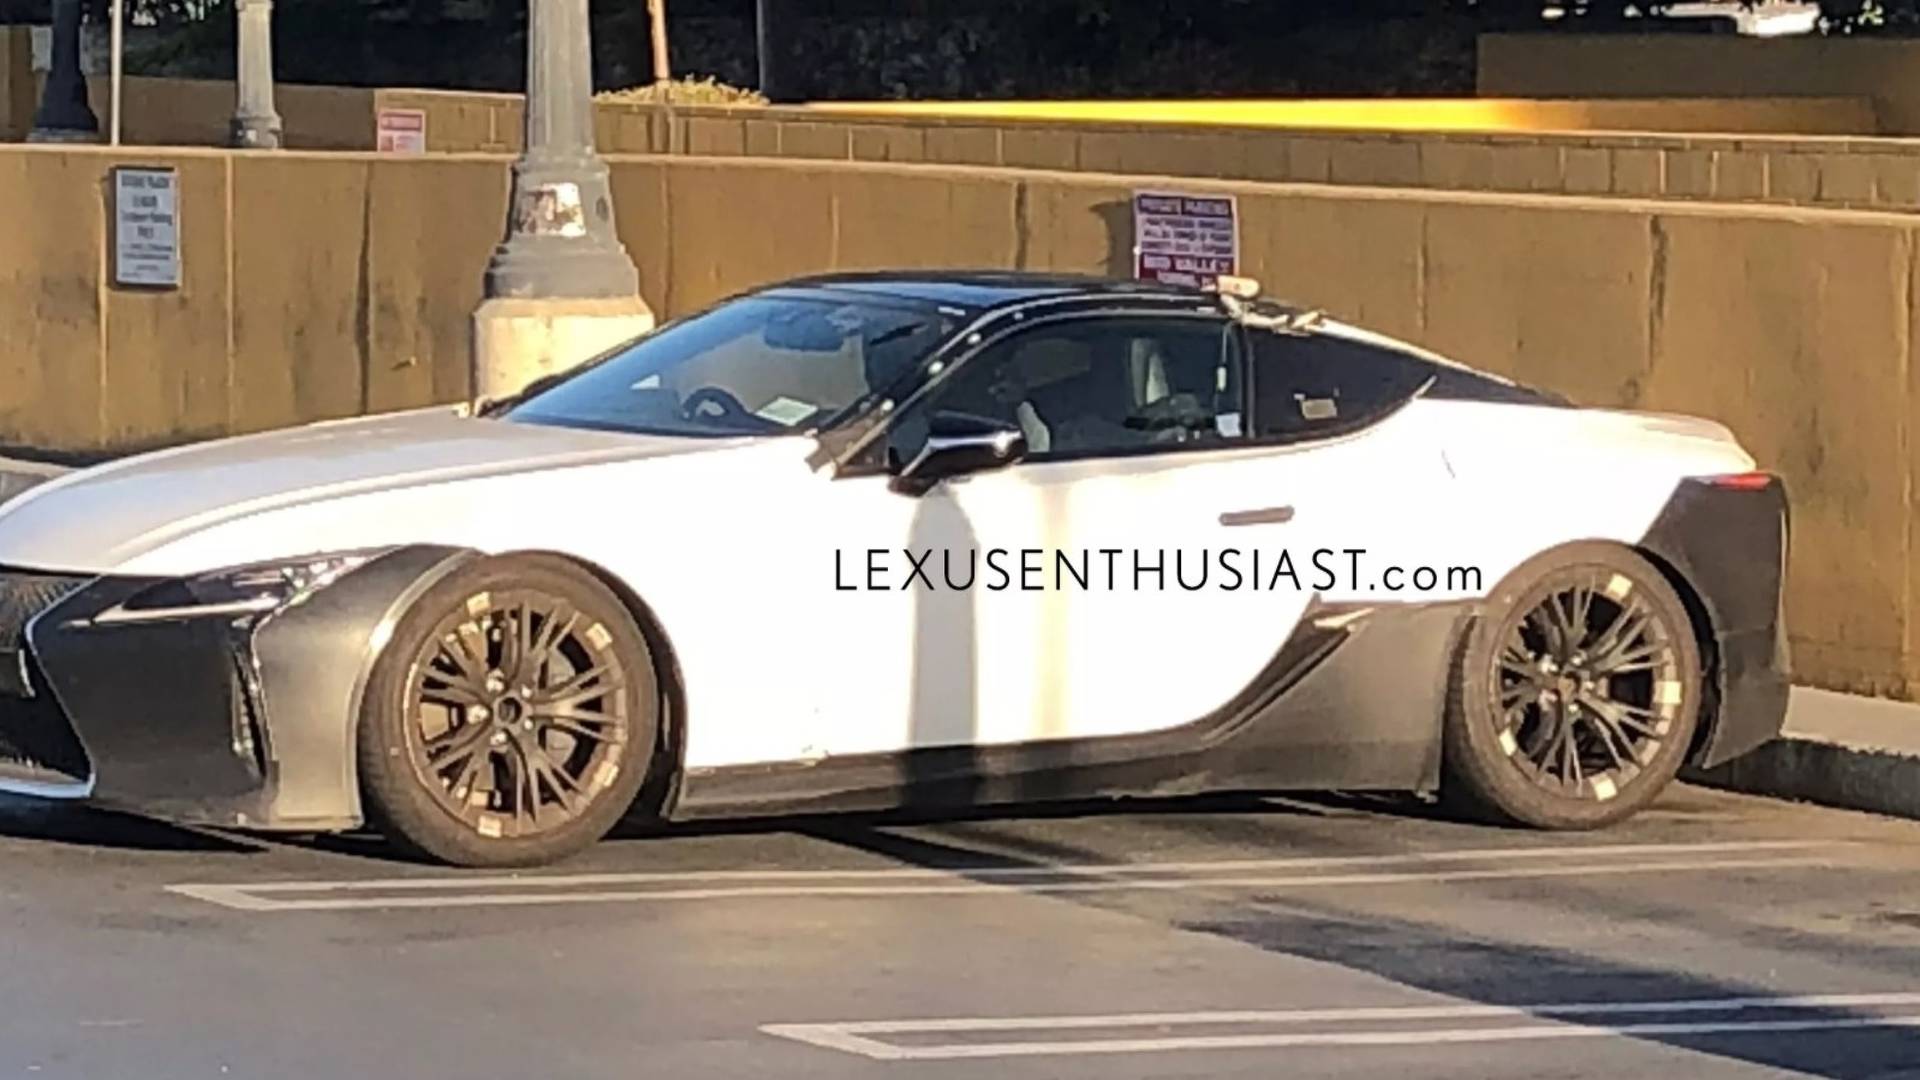 Could This Be Our First Look At The Lexus Lc F